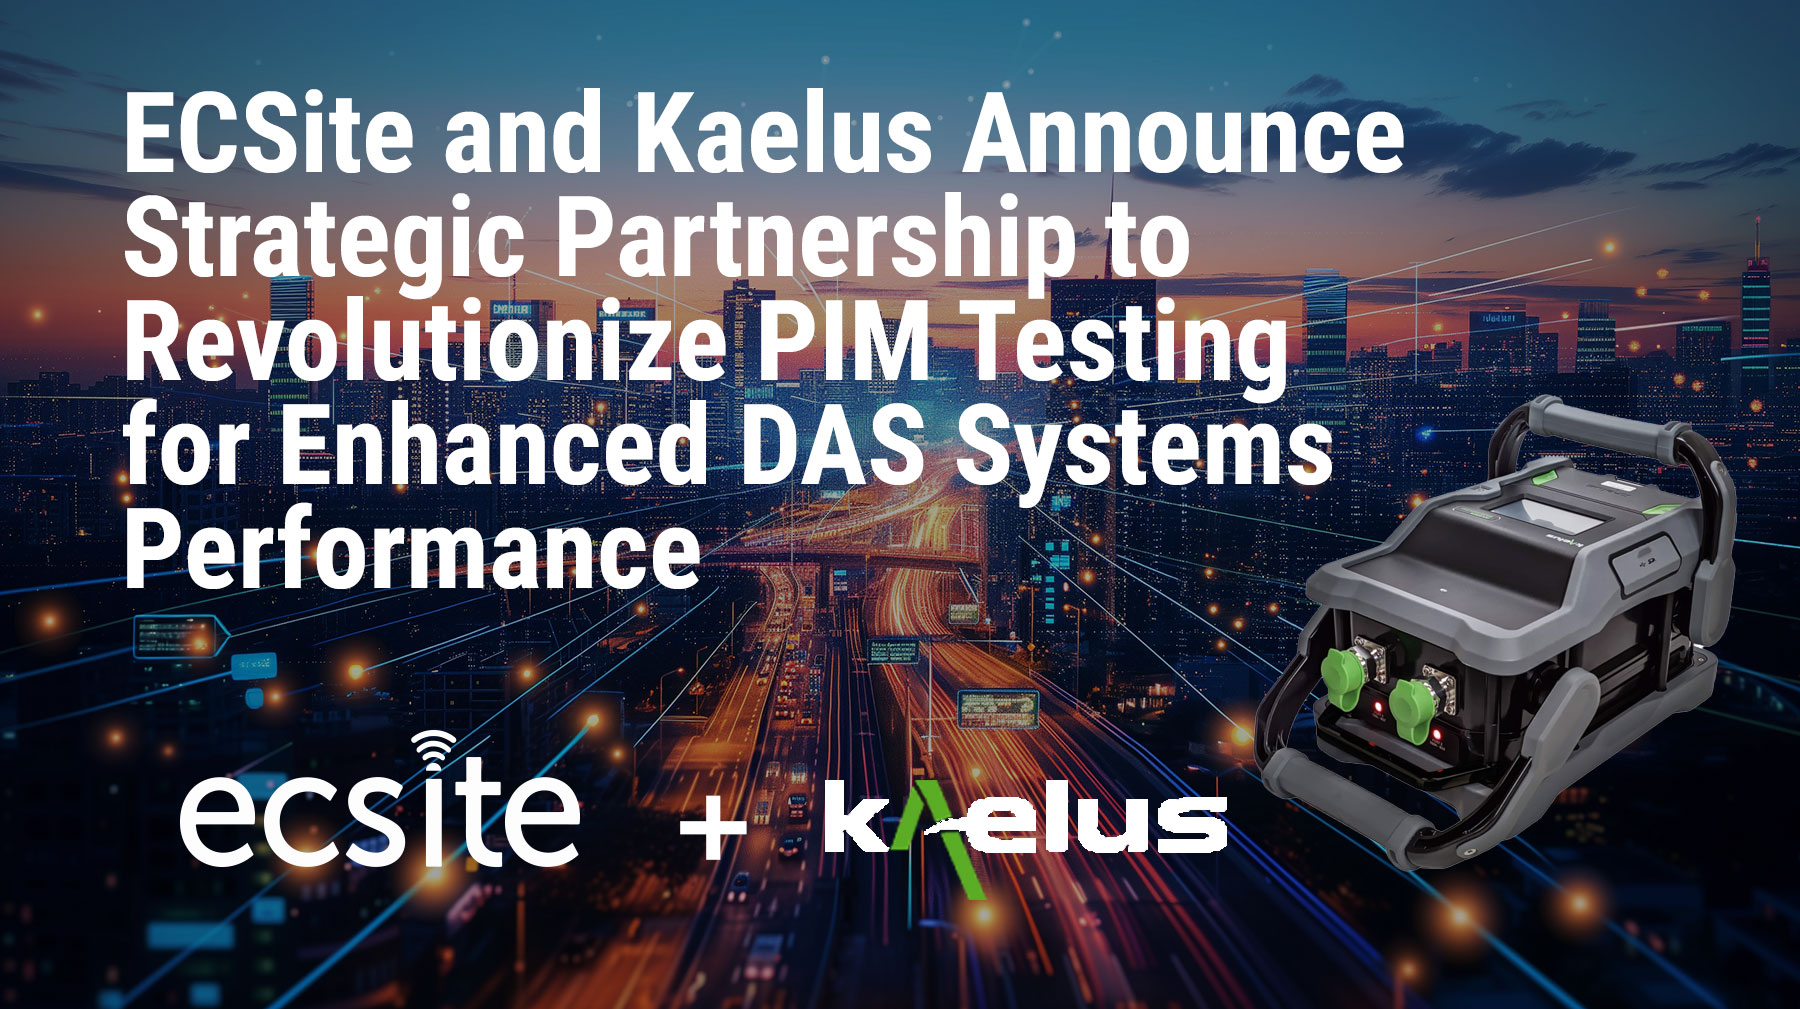 Featured image for “ECSite and Kaelus Announce Strategic Partnership to Revolutionize PIM Testing for Enhanced DAS Systems Performance”